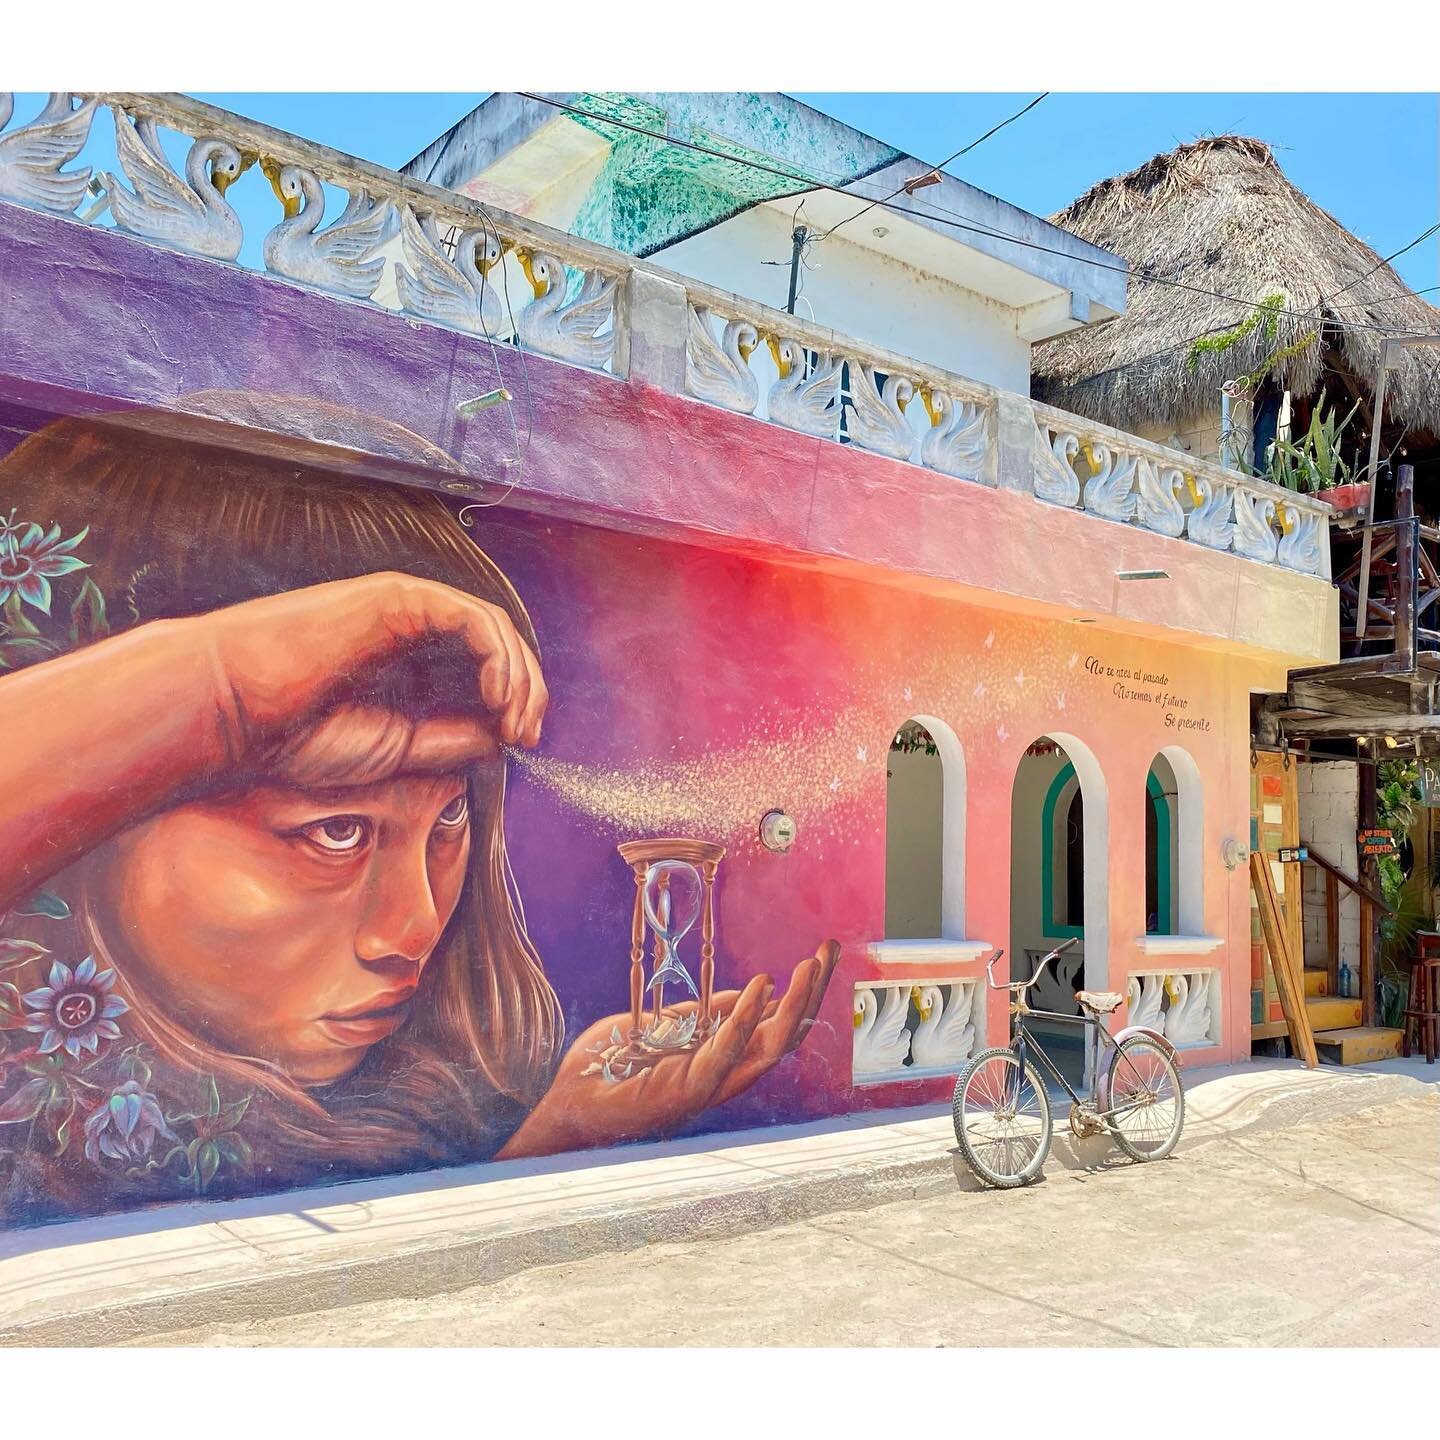 Sights and scenes of Holbox Island - aside from being eaten alive by mosquitoes, this place was dreamy 😍

#holboxisland #mexico #mexicotravel #travel #travelphotography #streetart #murals #beachesforlife #islandlife